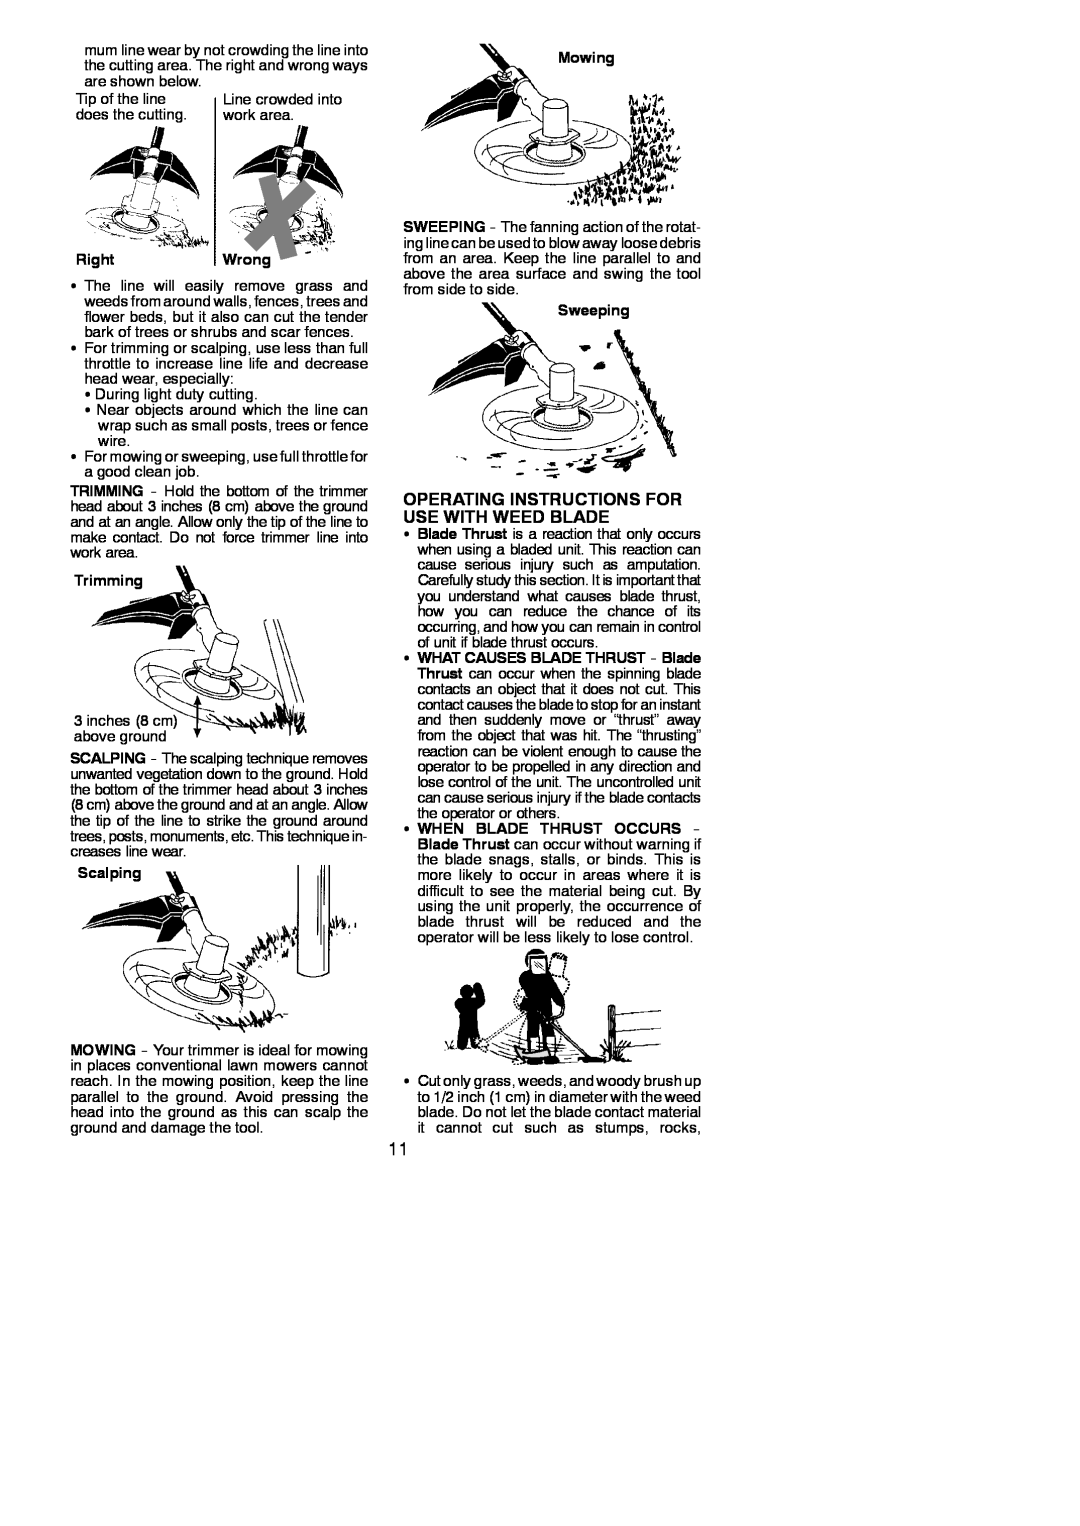 Poulan PP325 instruction manual Operating Instructions For Use With Weed Blade, RightWrong, Trimming, Scalping, Sweeping 